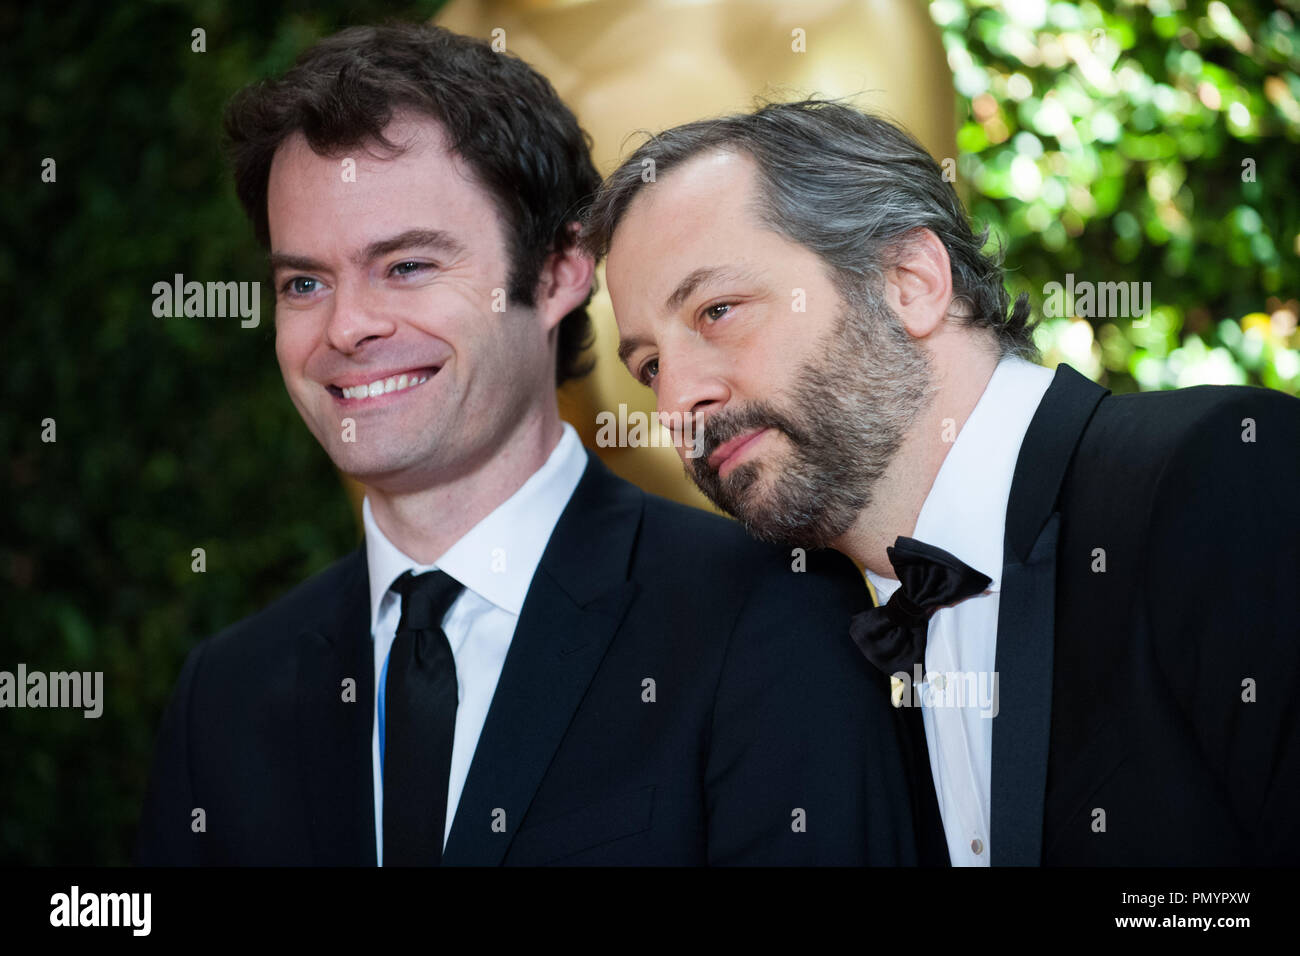 Actor Bill Hader (left) and writer-director Judd Apatow attend the 5th Annual Governors Awards at The Ray Dolby Ballroom at Hollywood & Highland Center® in Hollywood, CA, on Saturday, November 16, 2013.  File Reference # 32184 027  For Editorial Use Only -  All Rights Reserved Stock Photo